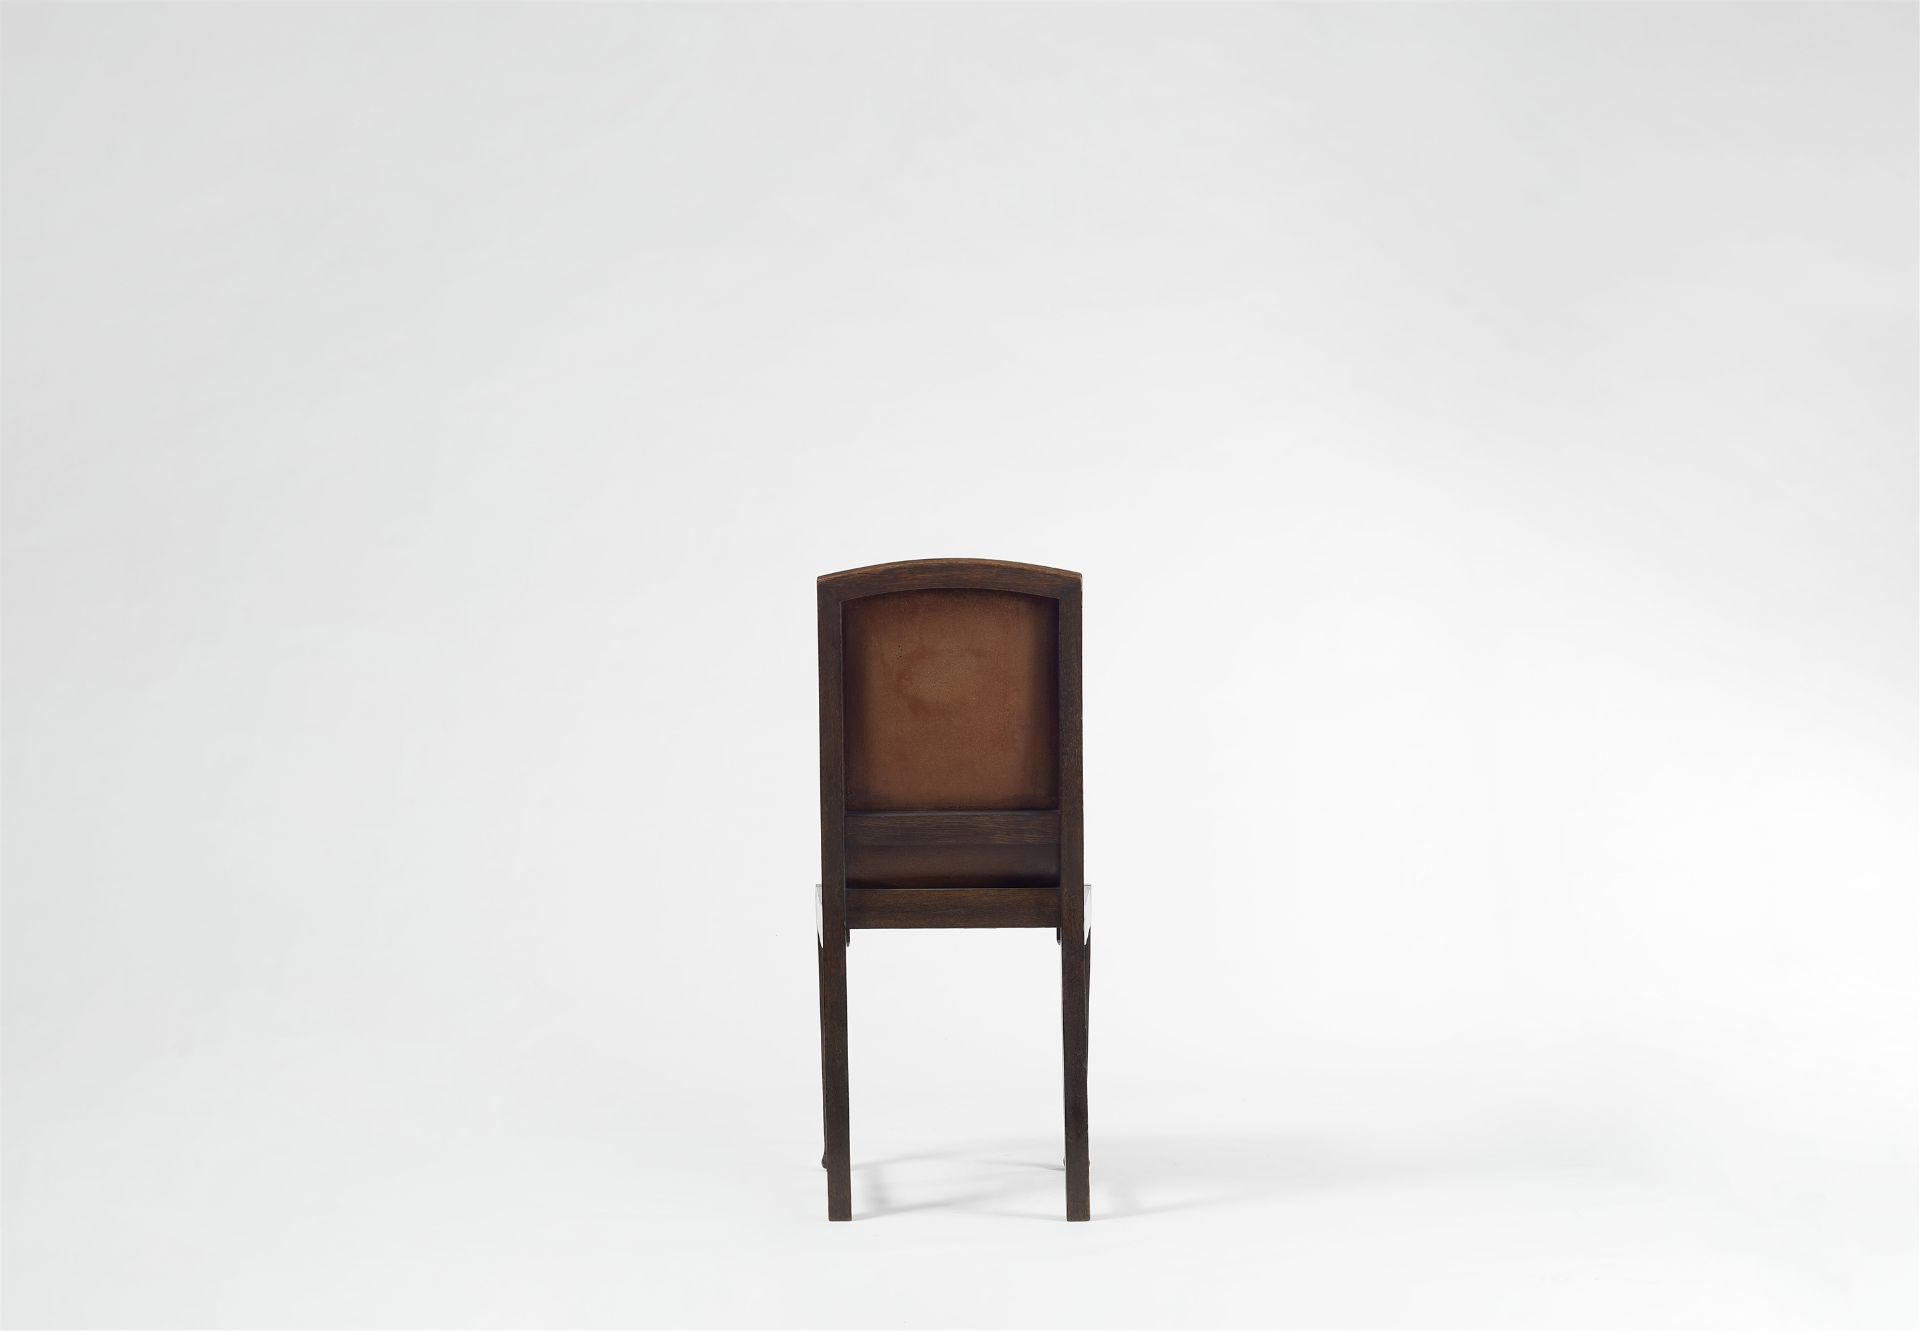 Chair by Lawrenz & Co. Berlin - Image 2 of 4